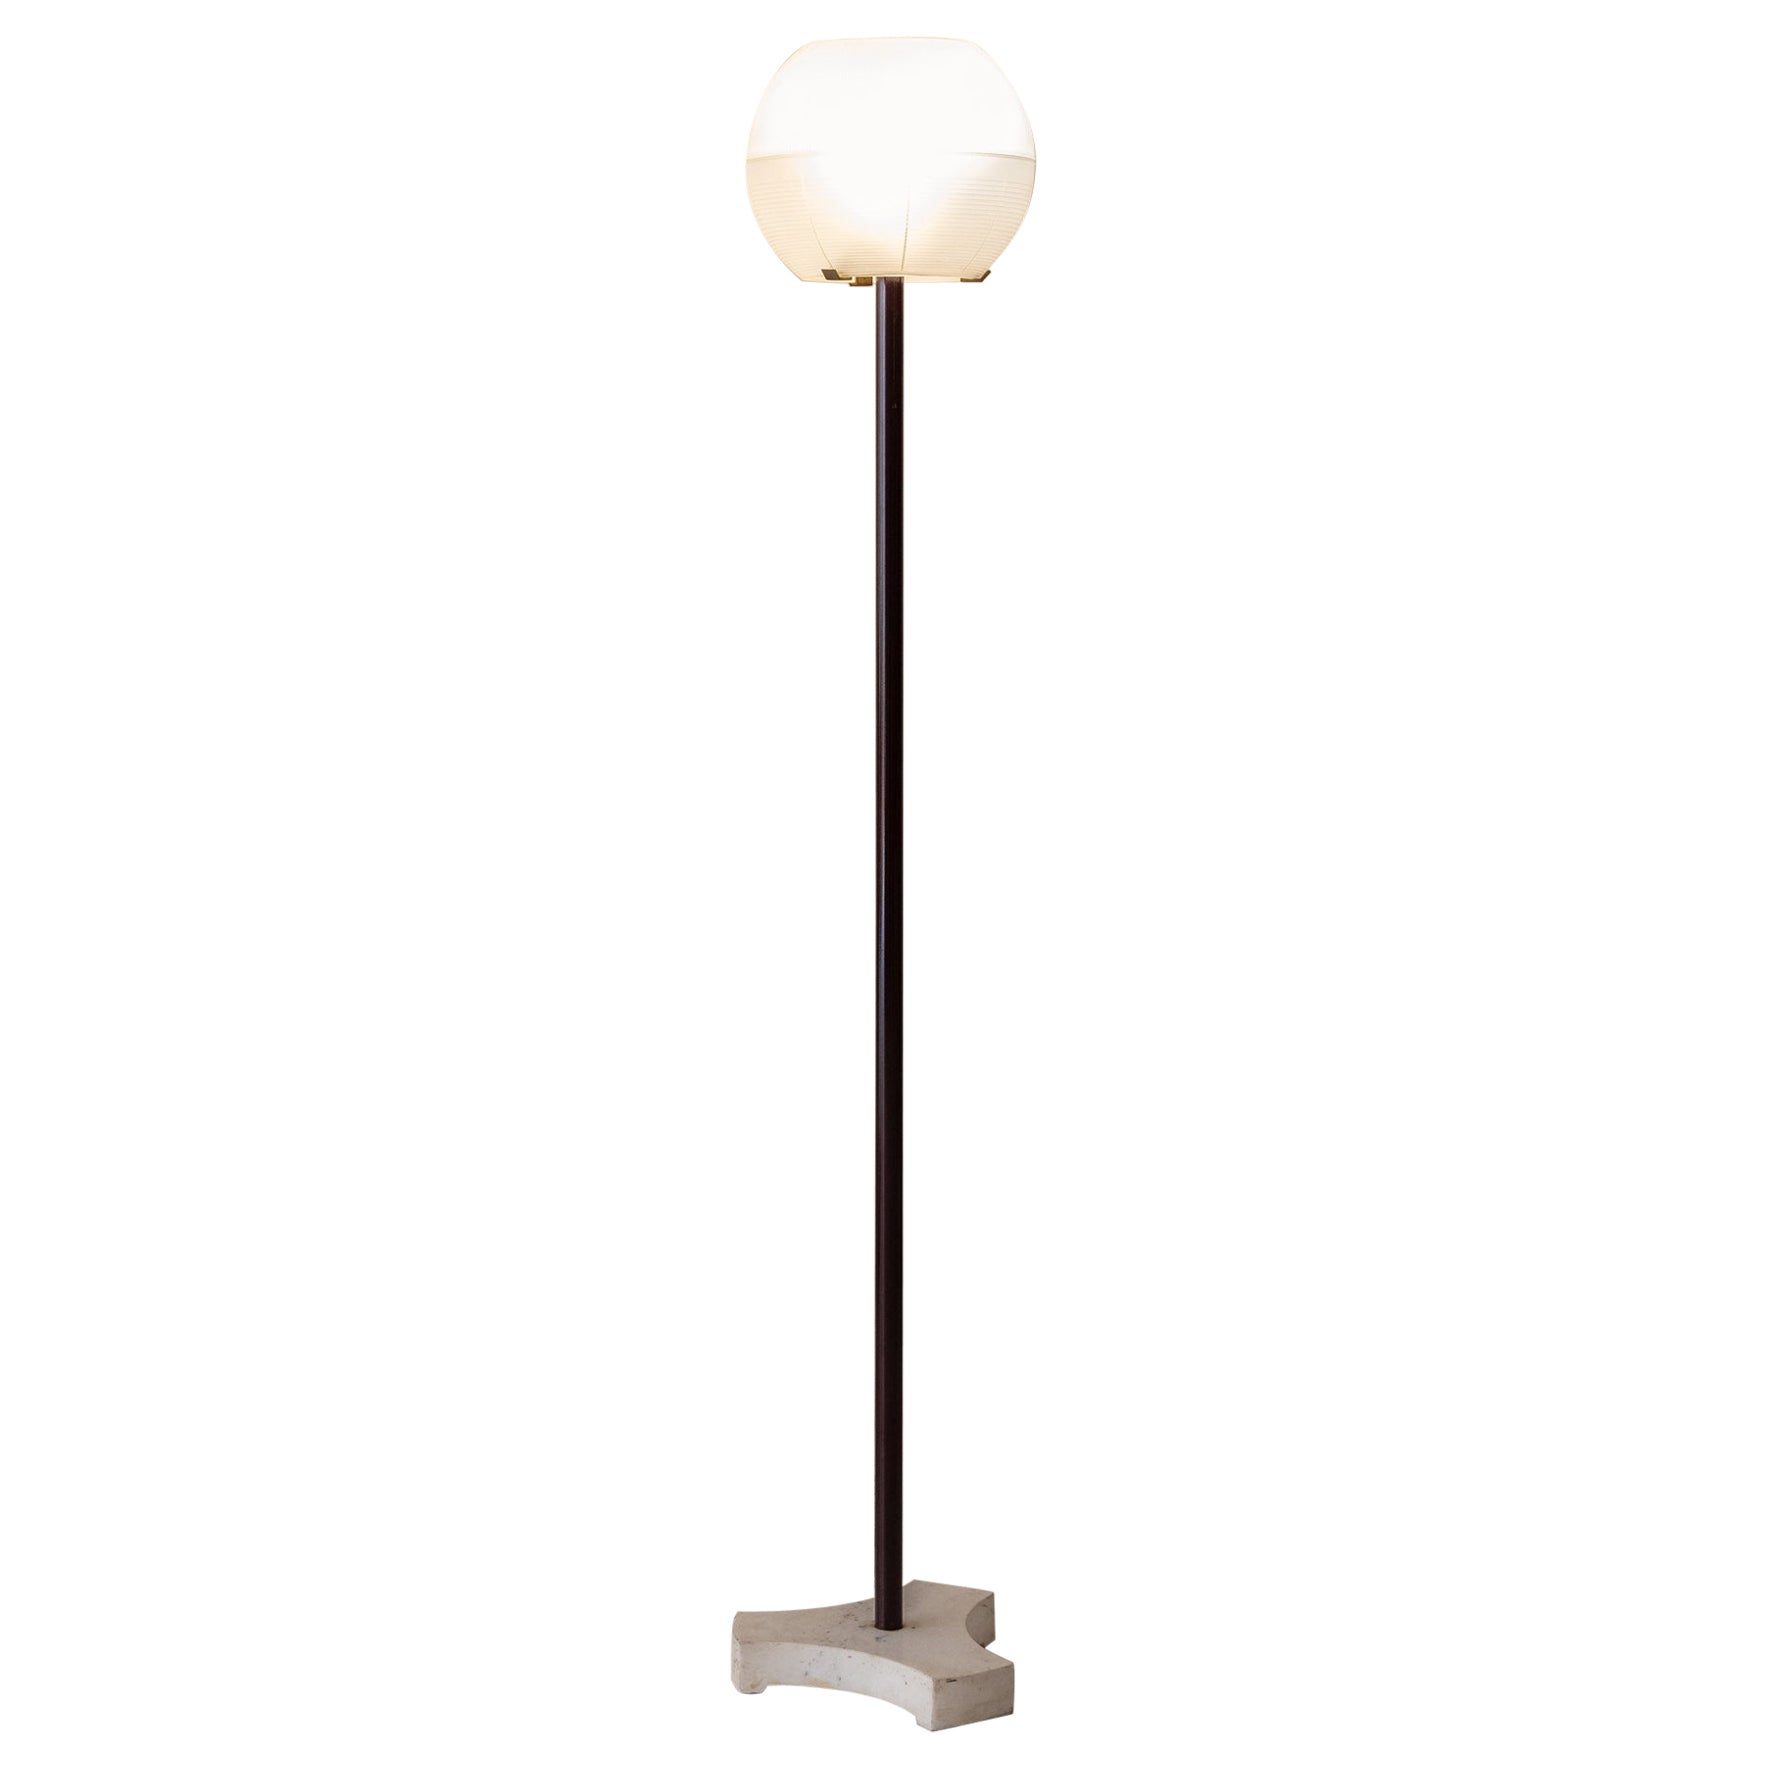 Midcentury floor Lamp mod. LTE 8 by Ignazio Gardella for Azucena, Italy 1956 For Sale